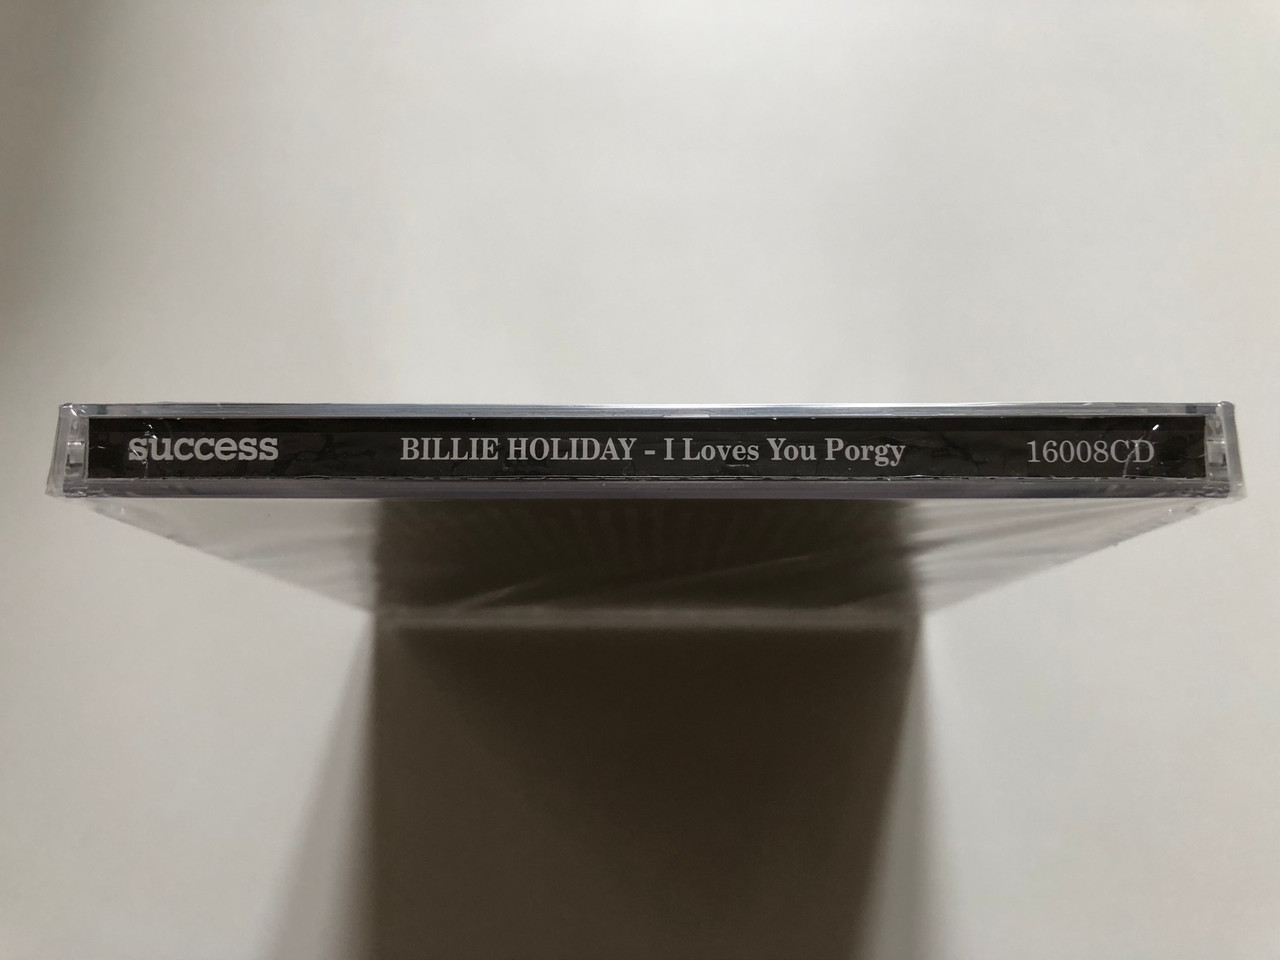 https://cdn10.bigcommerce.com/s-62bdpkt7pb/products/0/images/311281/Billie_Holiday_I_Loves_You_Porgy_Biographical_details_on_the_back_Success_Audio_CD_16008CD_3__05810.1699549175.1280.1280.JPG?c=2